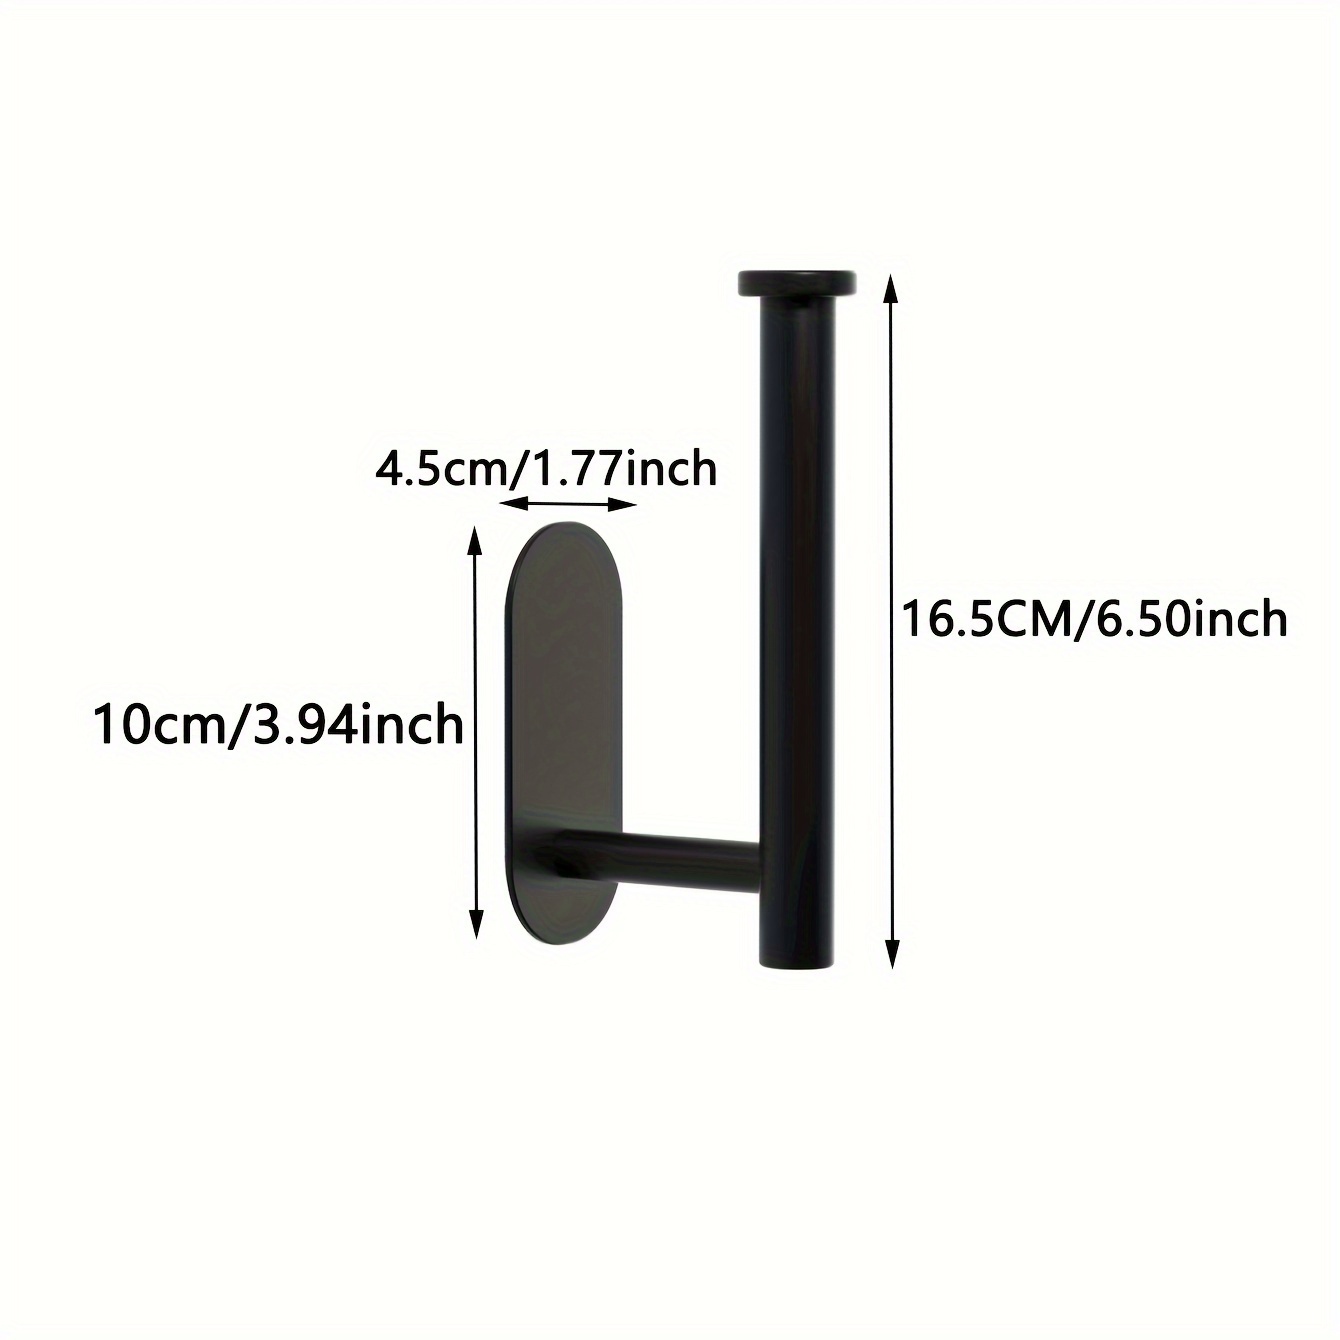 Black Tl Paper Holder Short/long Bathroom Tissue Roll Holder With Wall  Mounted Installation, Punch-free Toilet Paper Rack